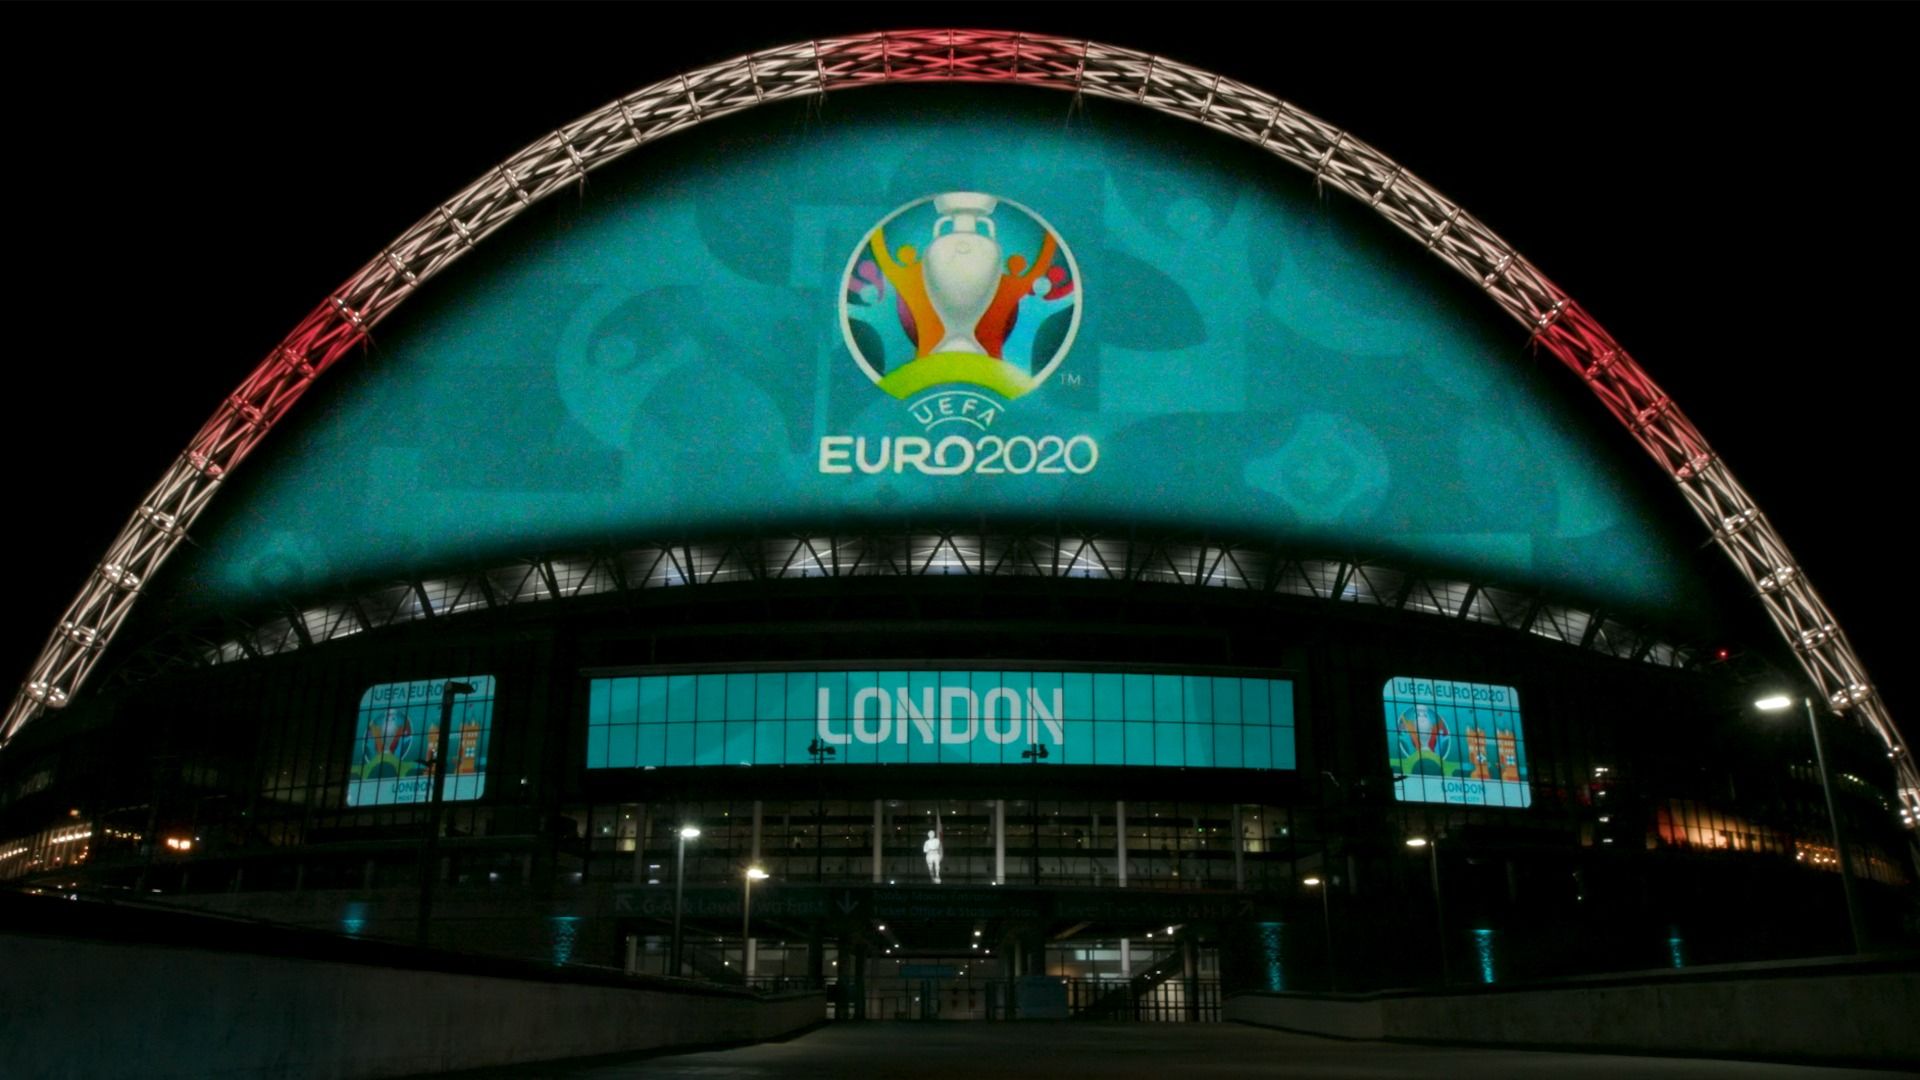 The FA and London mark one year to go until UEFA EURO 2020 Venue Business (SVB)